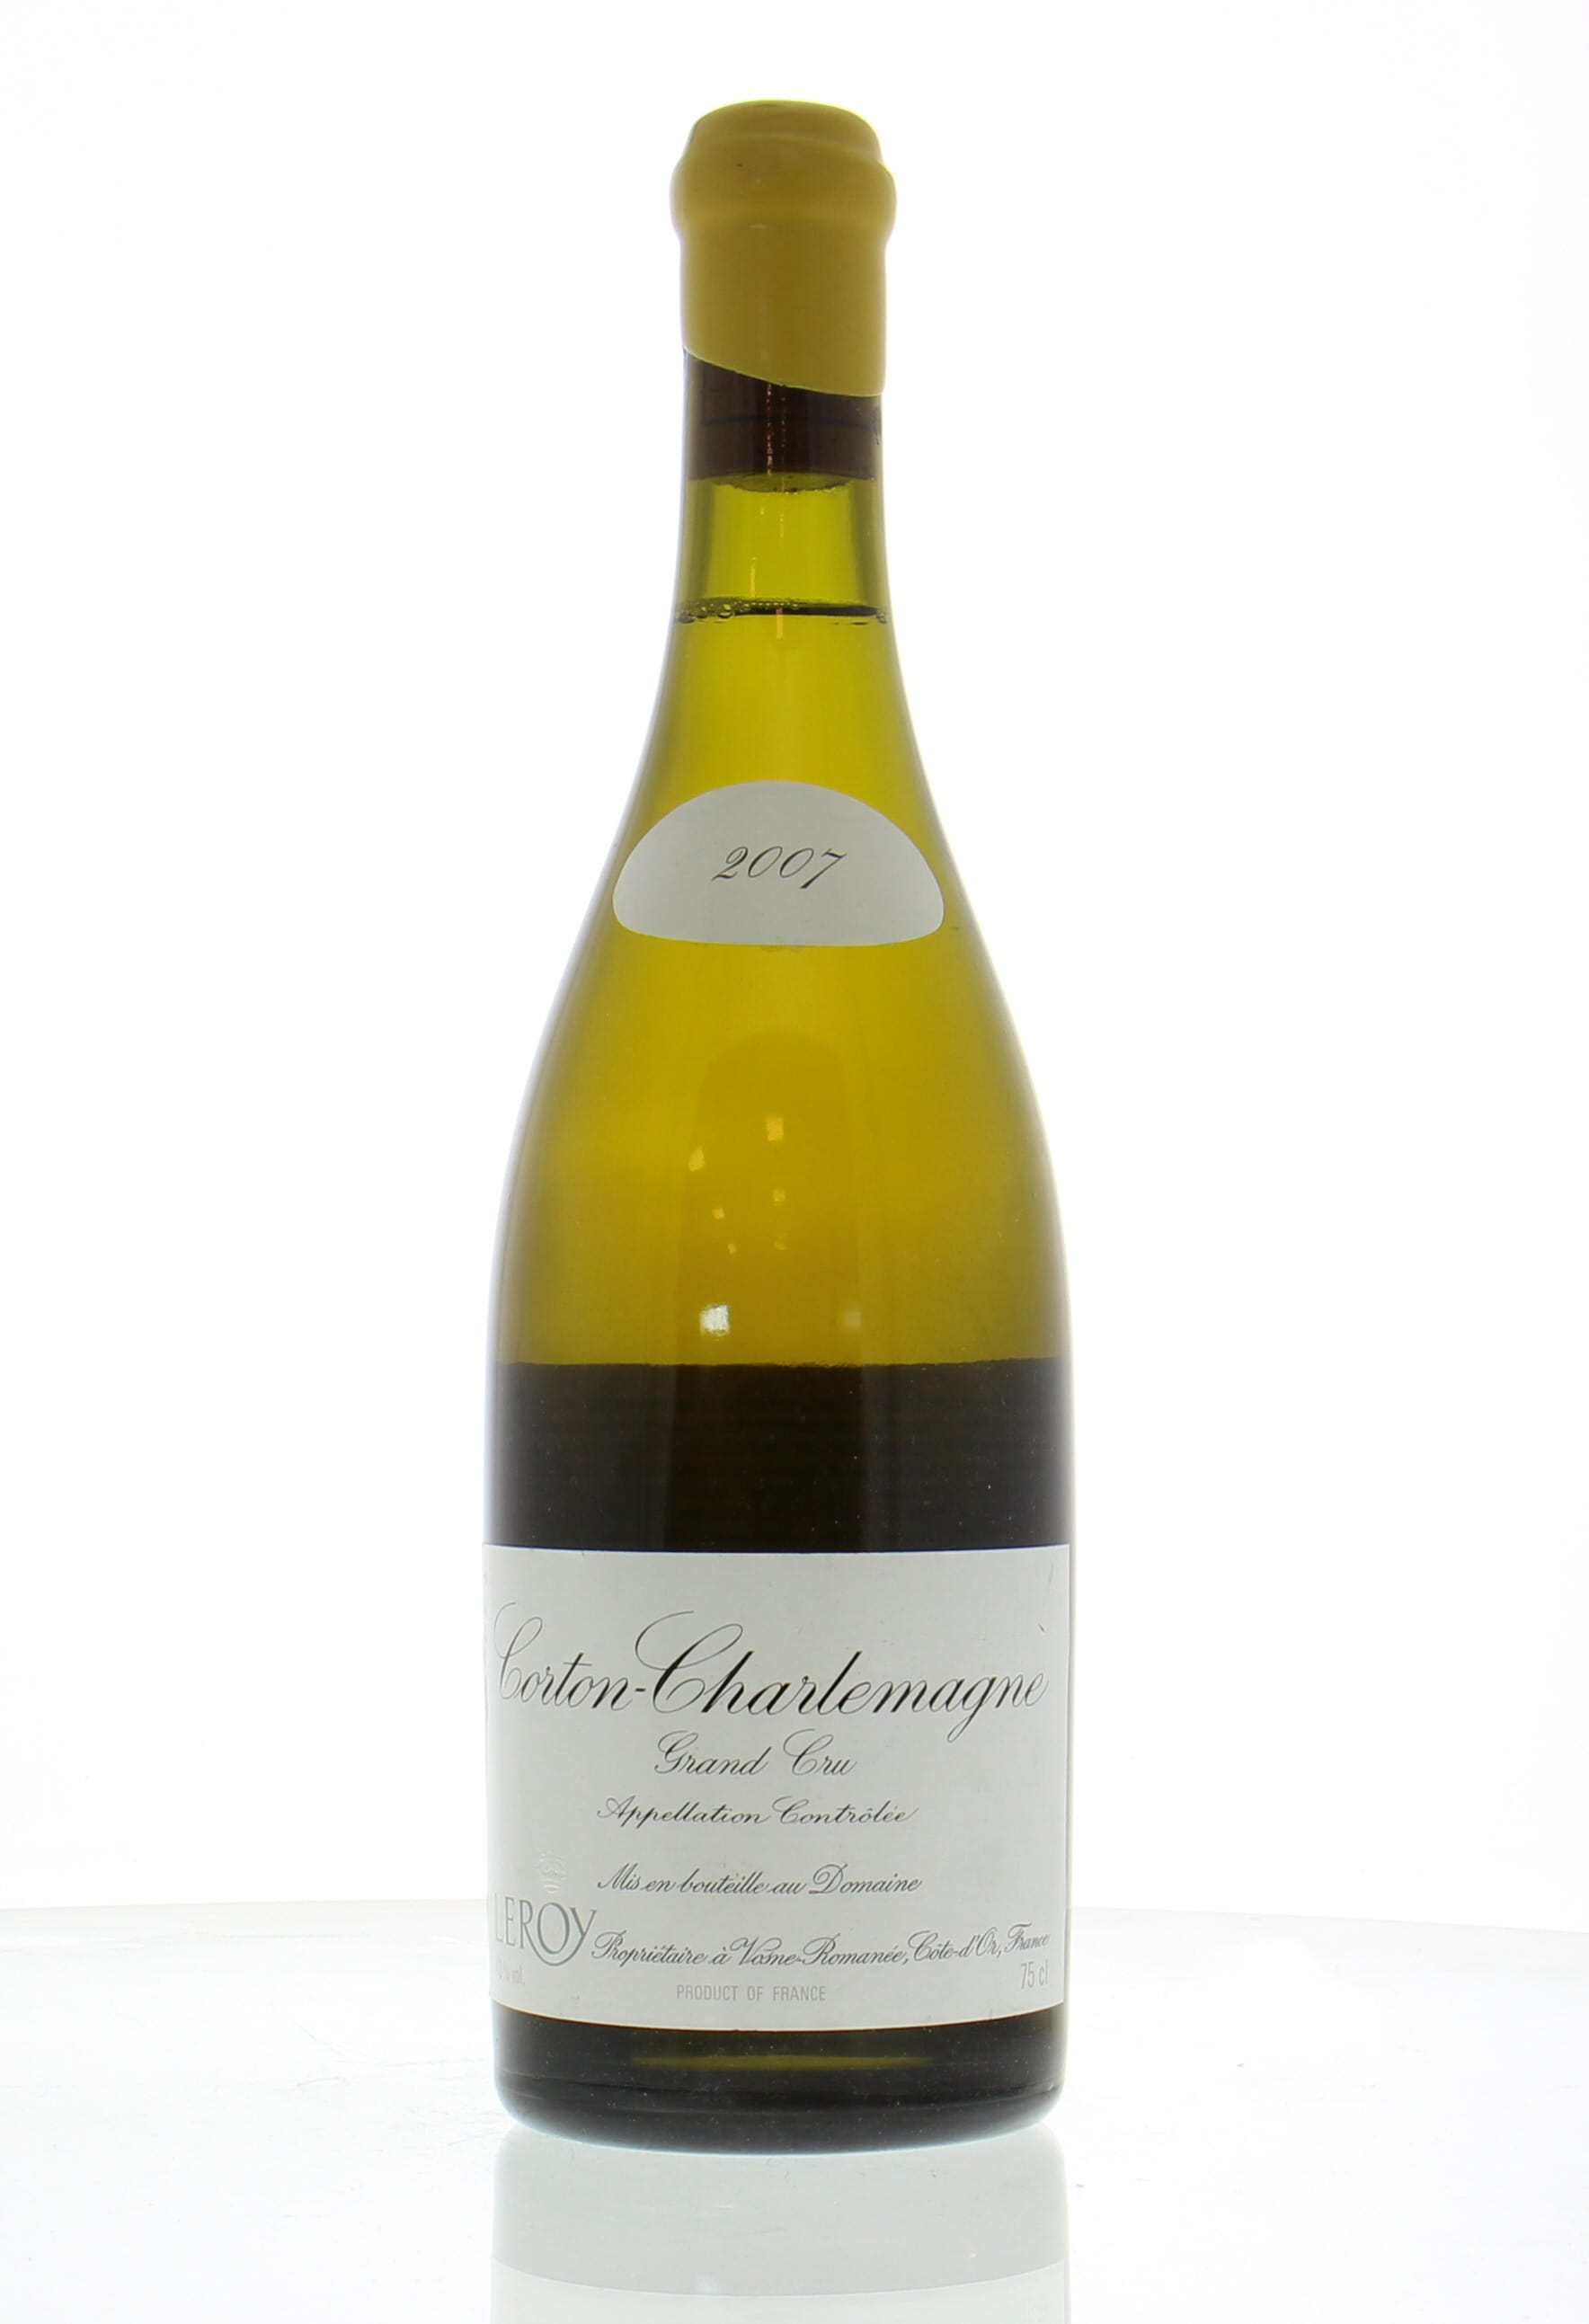 Domaine Leroy - Corton Charlemagne 2007 Perfect